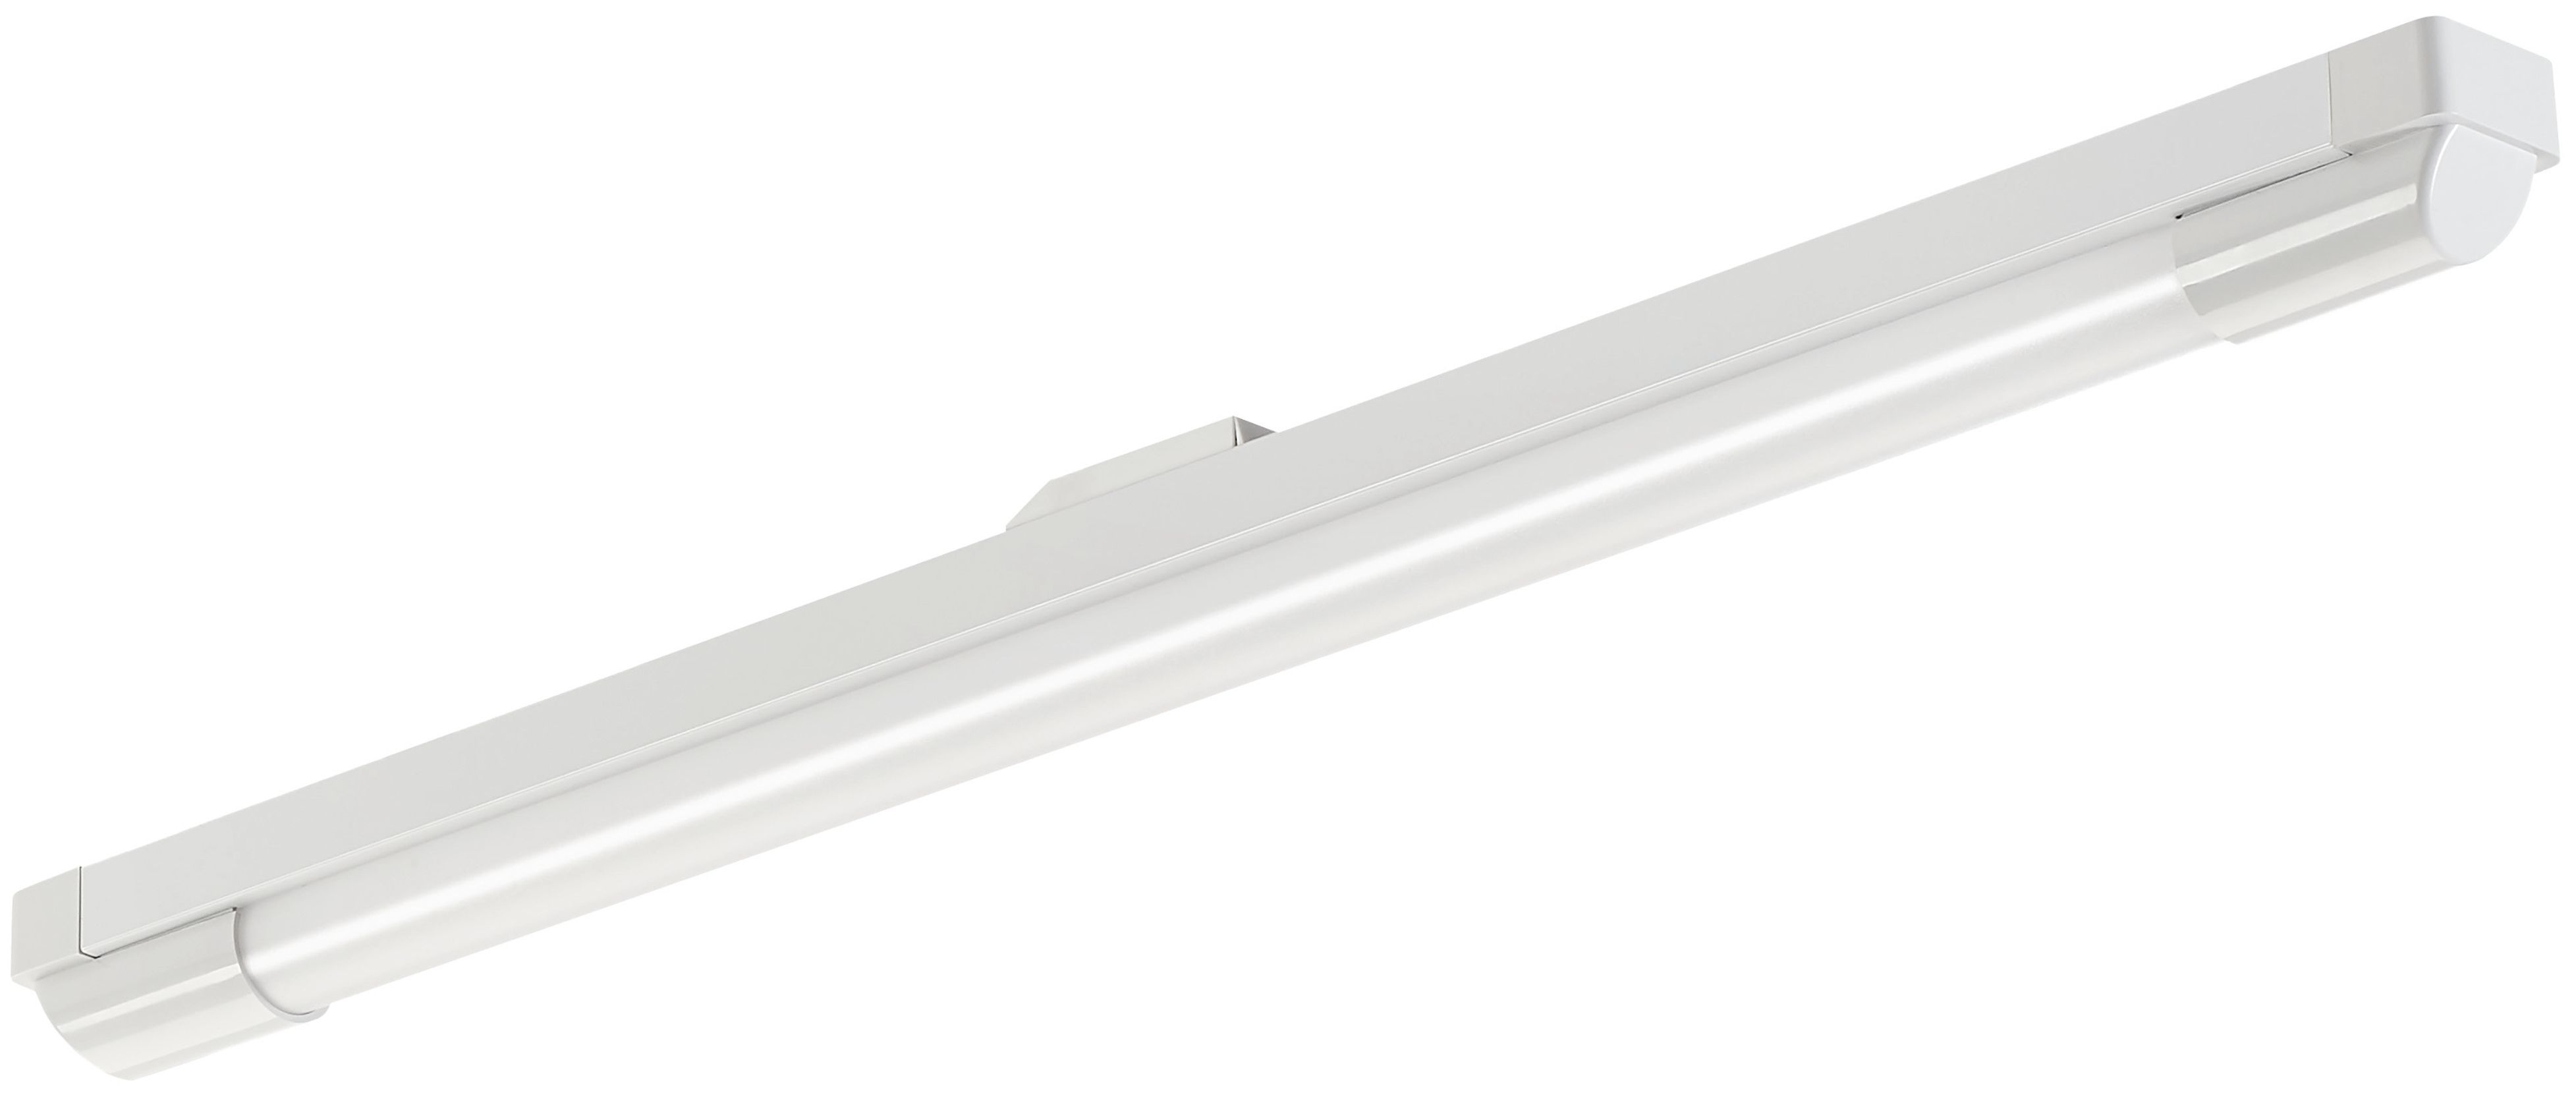 Image of Sylvania Single 2ft IP20 Light Fitting with T8 Integrated LED Tube - 8W